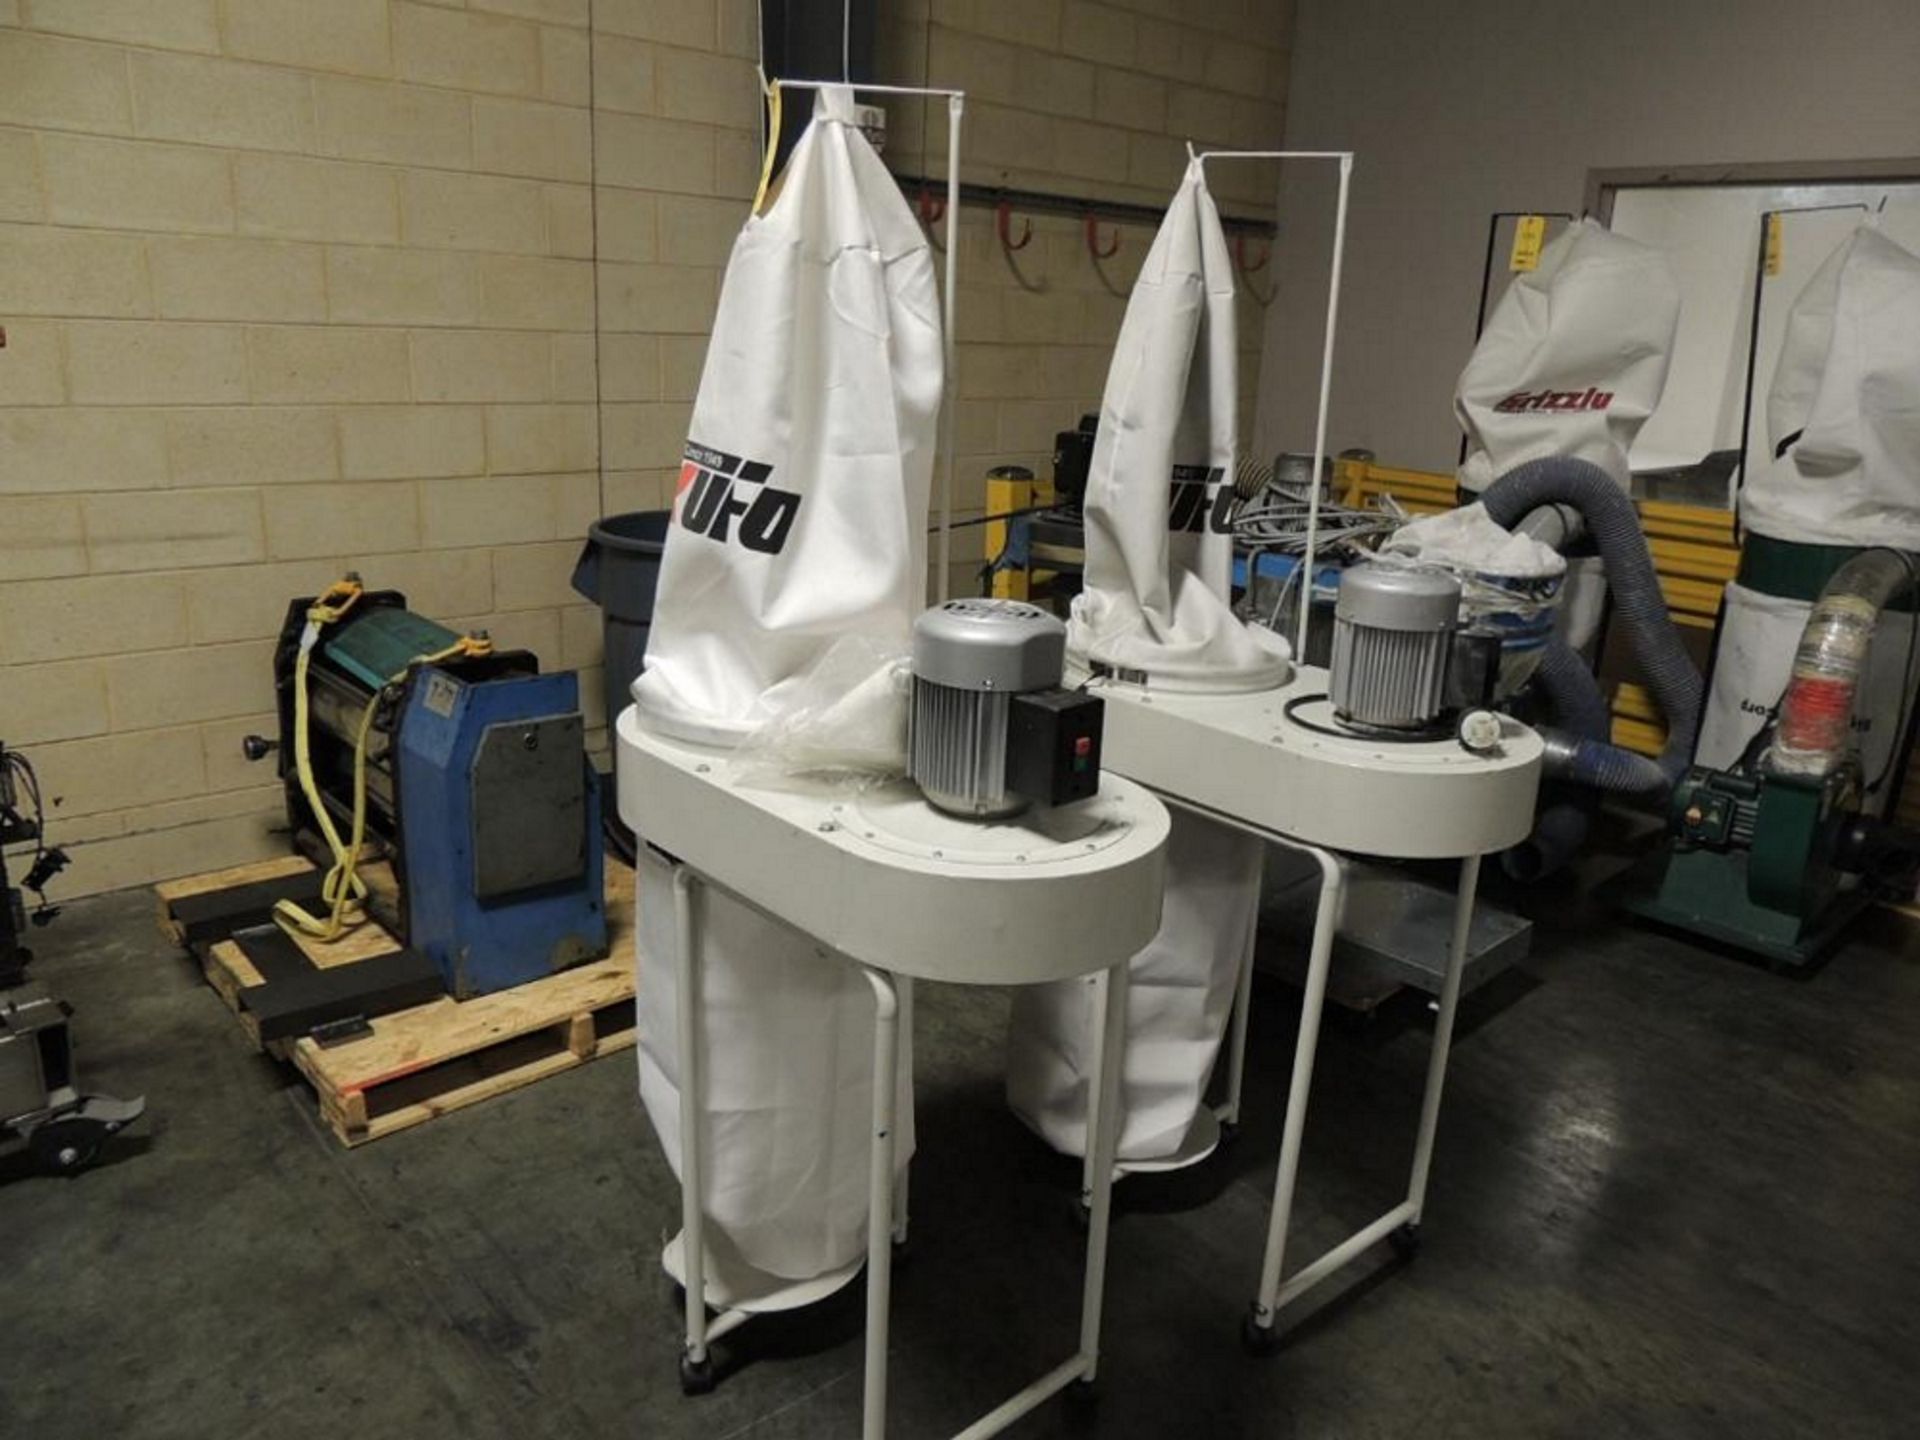 LOT: (2) Kufo Dust Collector Model Ufo-101h, 220/480 Volt, (2) Unknown Mfg. Dust Collectors Incomple